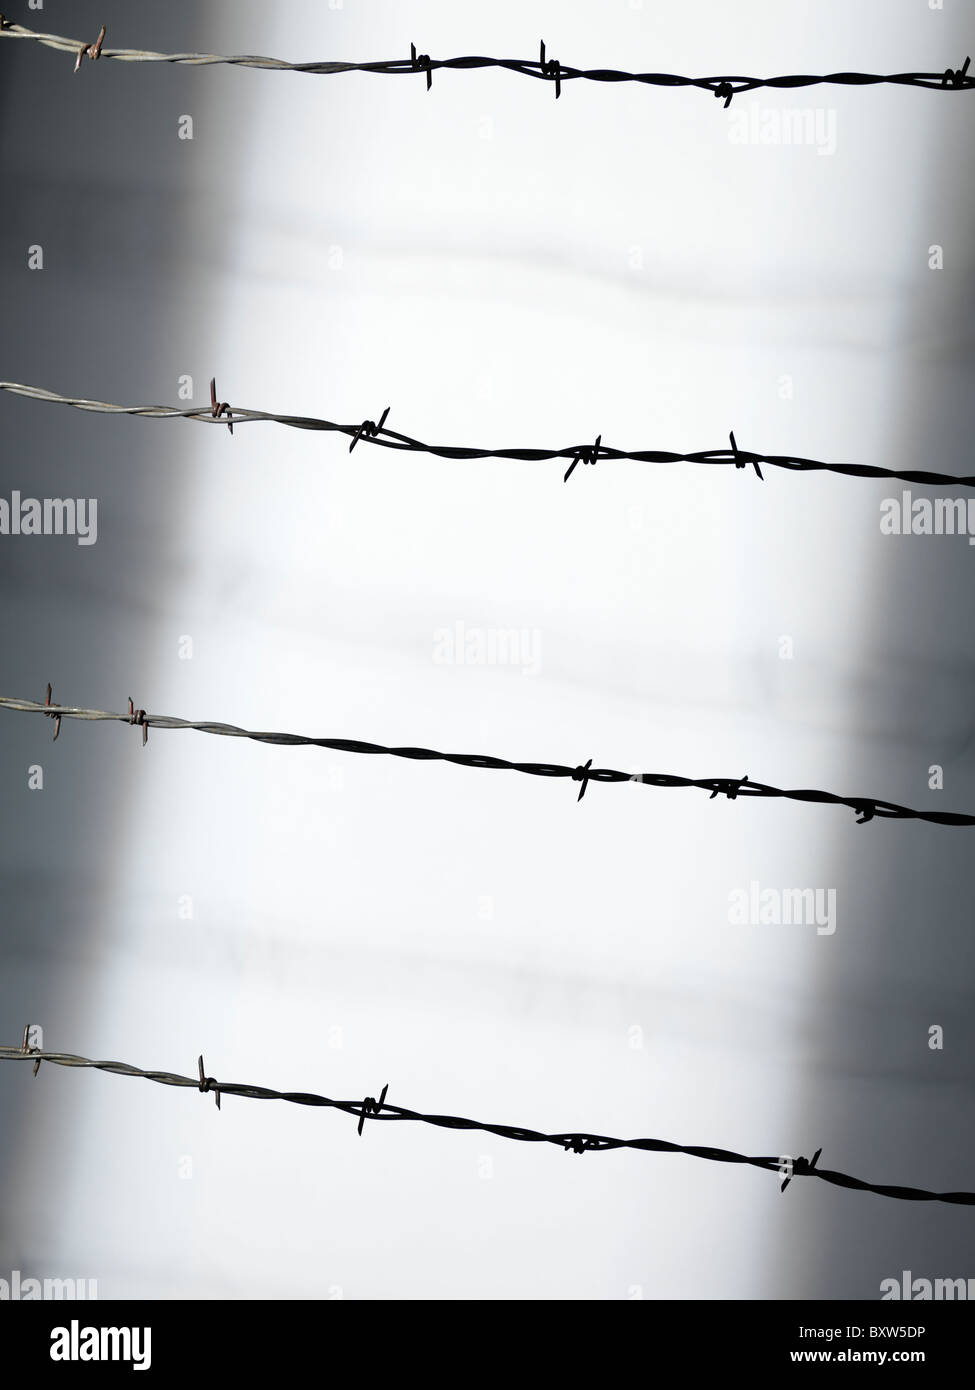 Barbed wire conceptual background Stock Photo